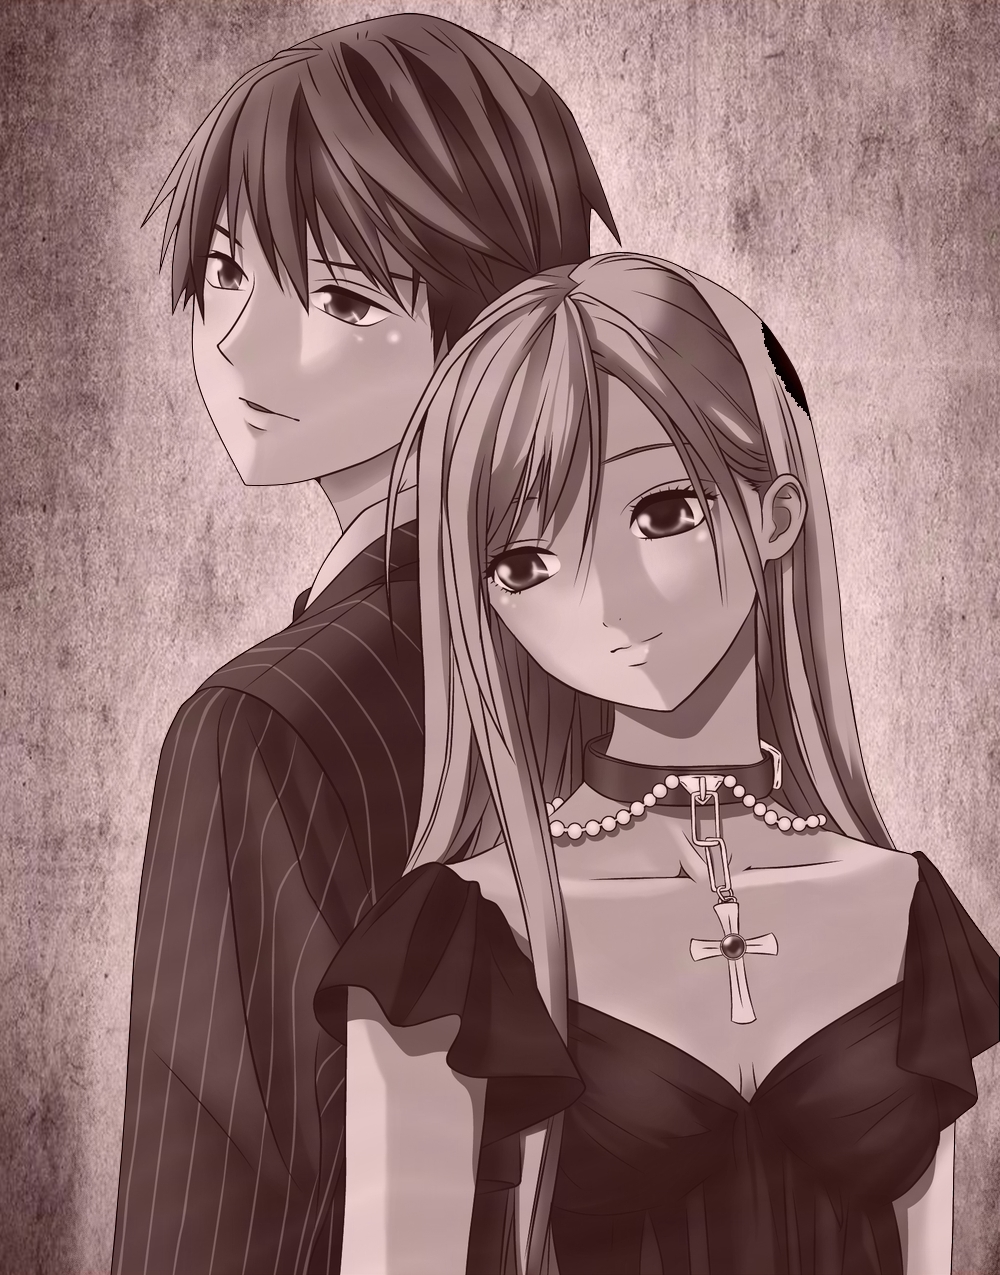 Anime Couple : Cute Anime Couple Wallpapers - Wallpaper Cave - We did